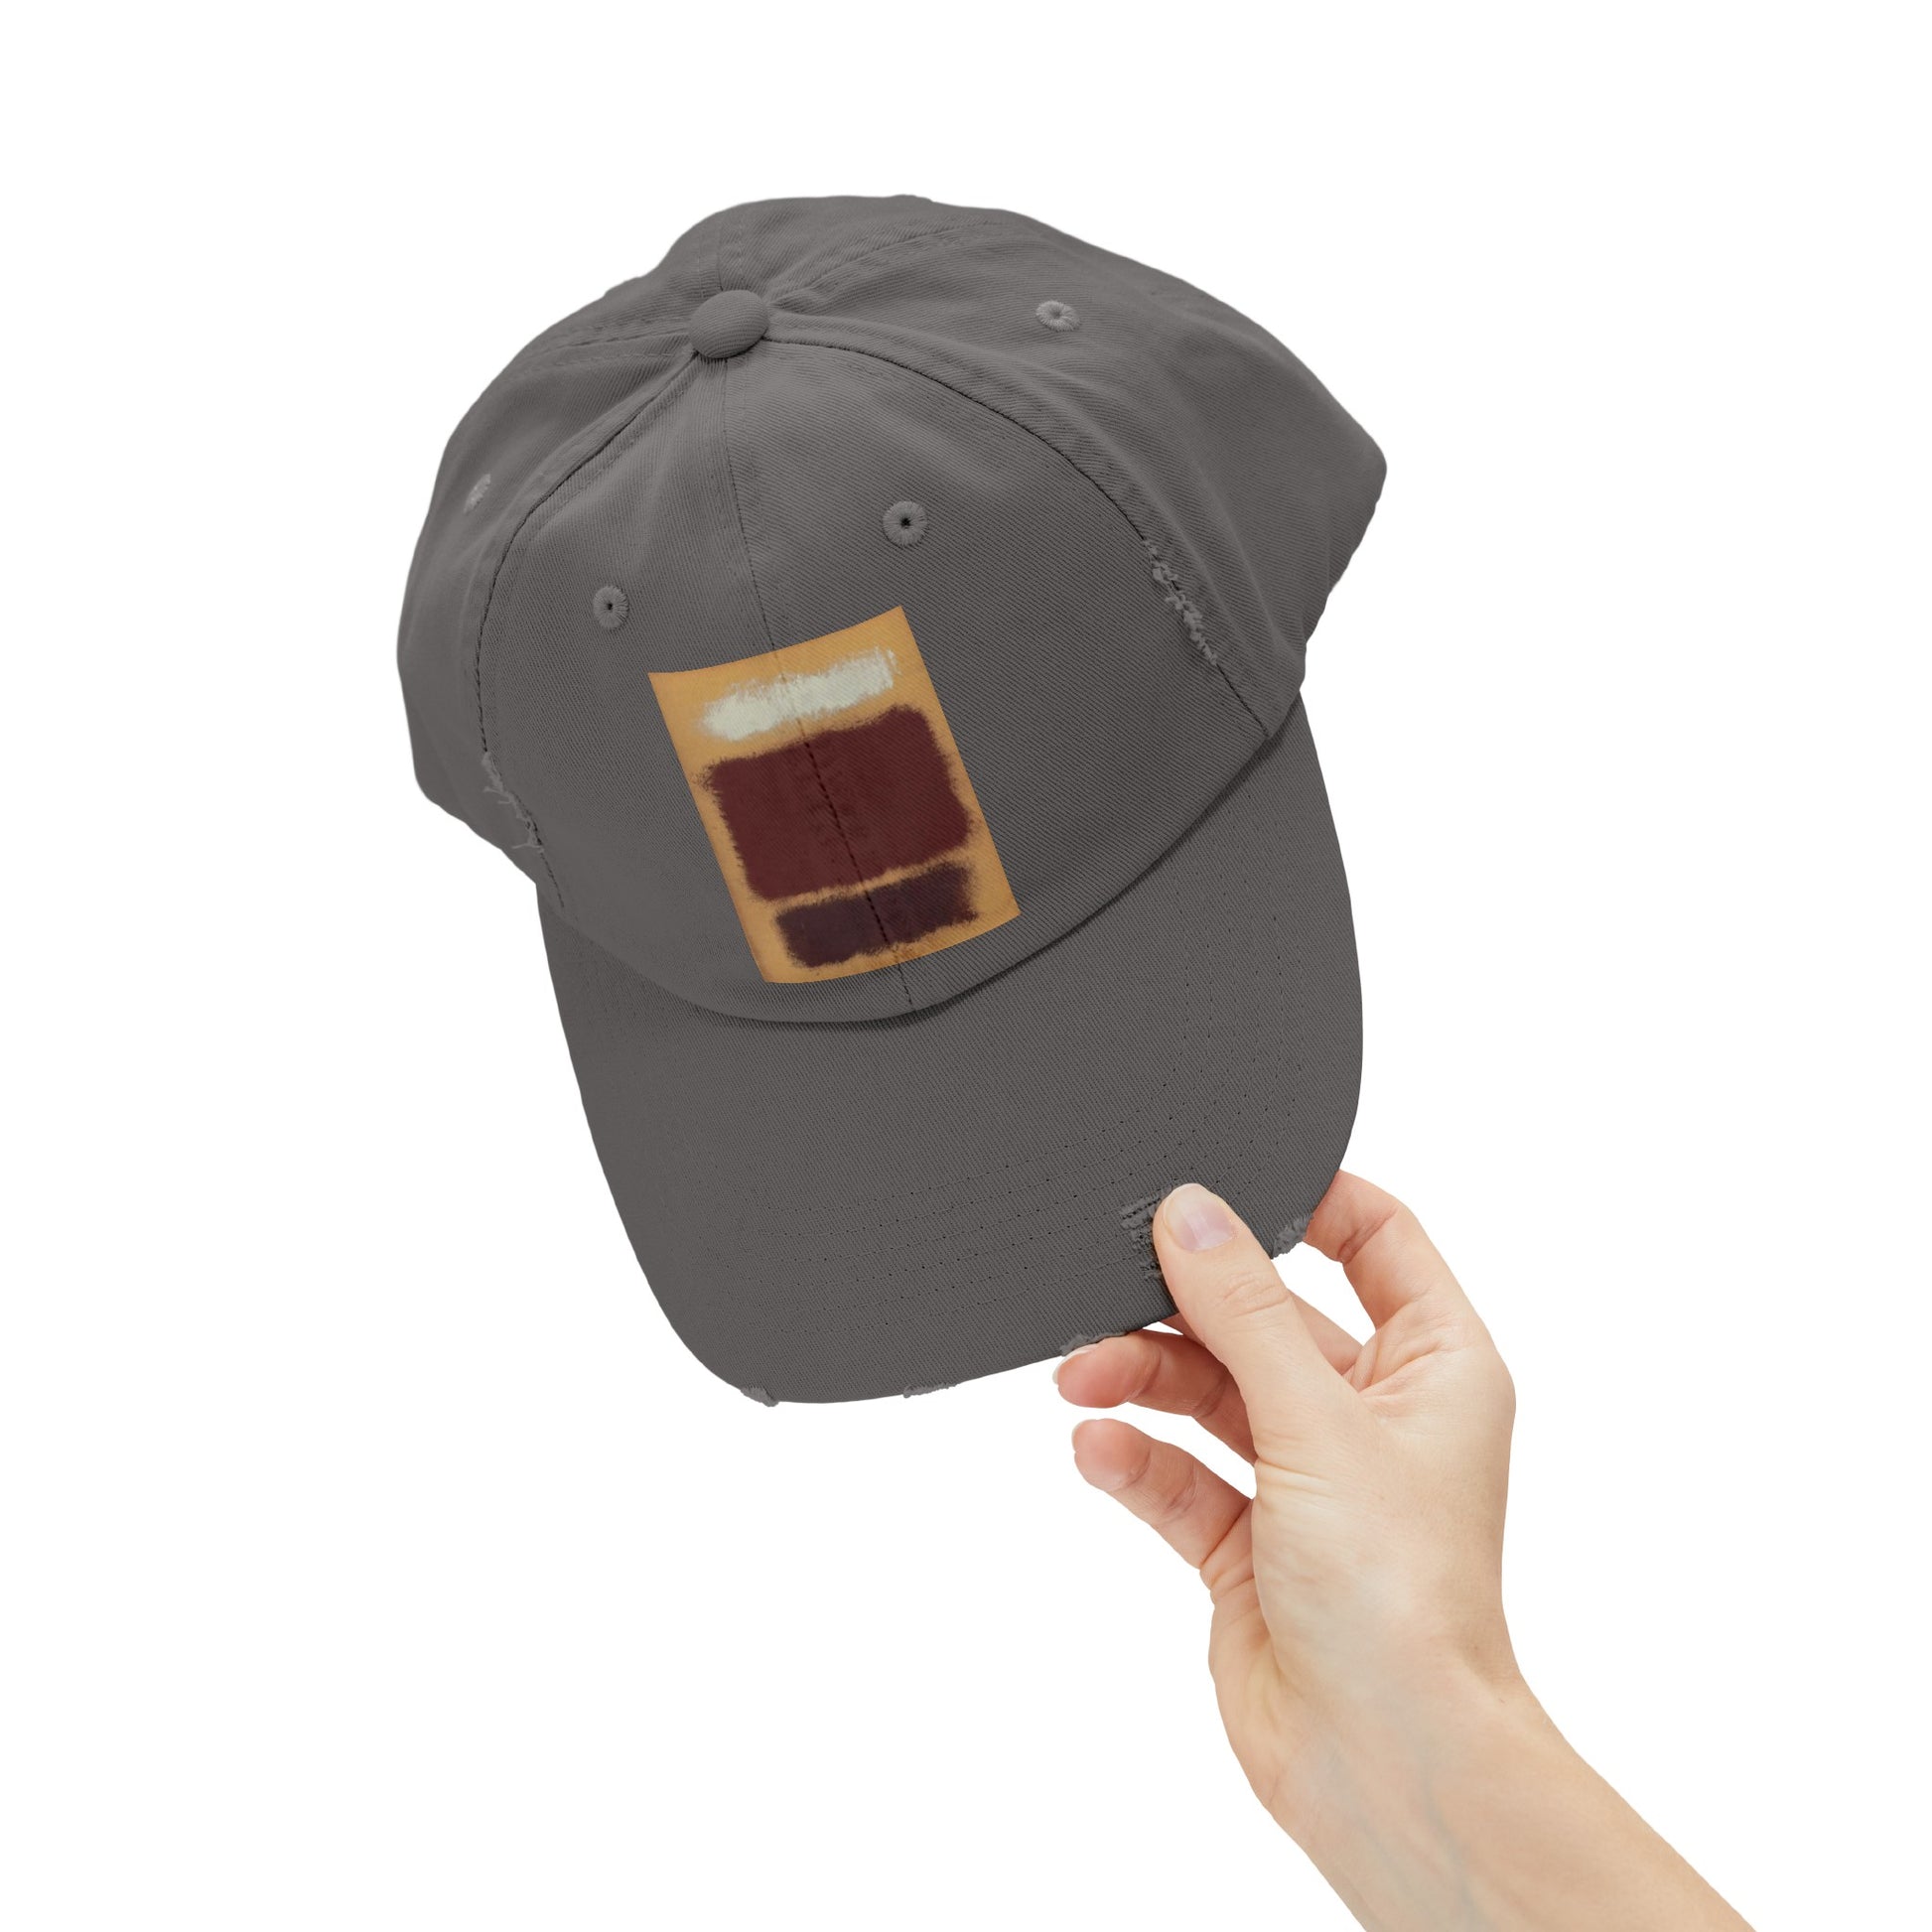 a person holding a gray hat with a patch on it